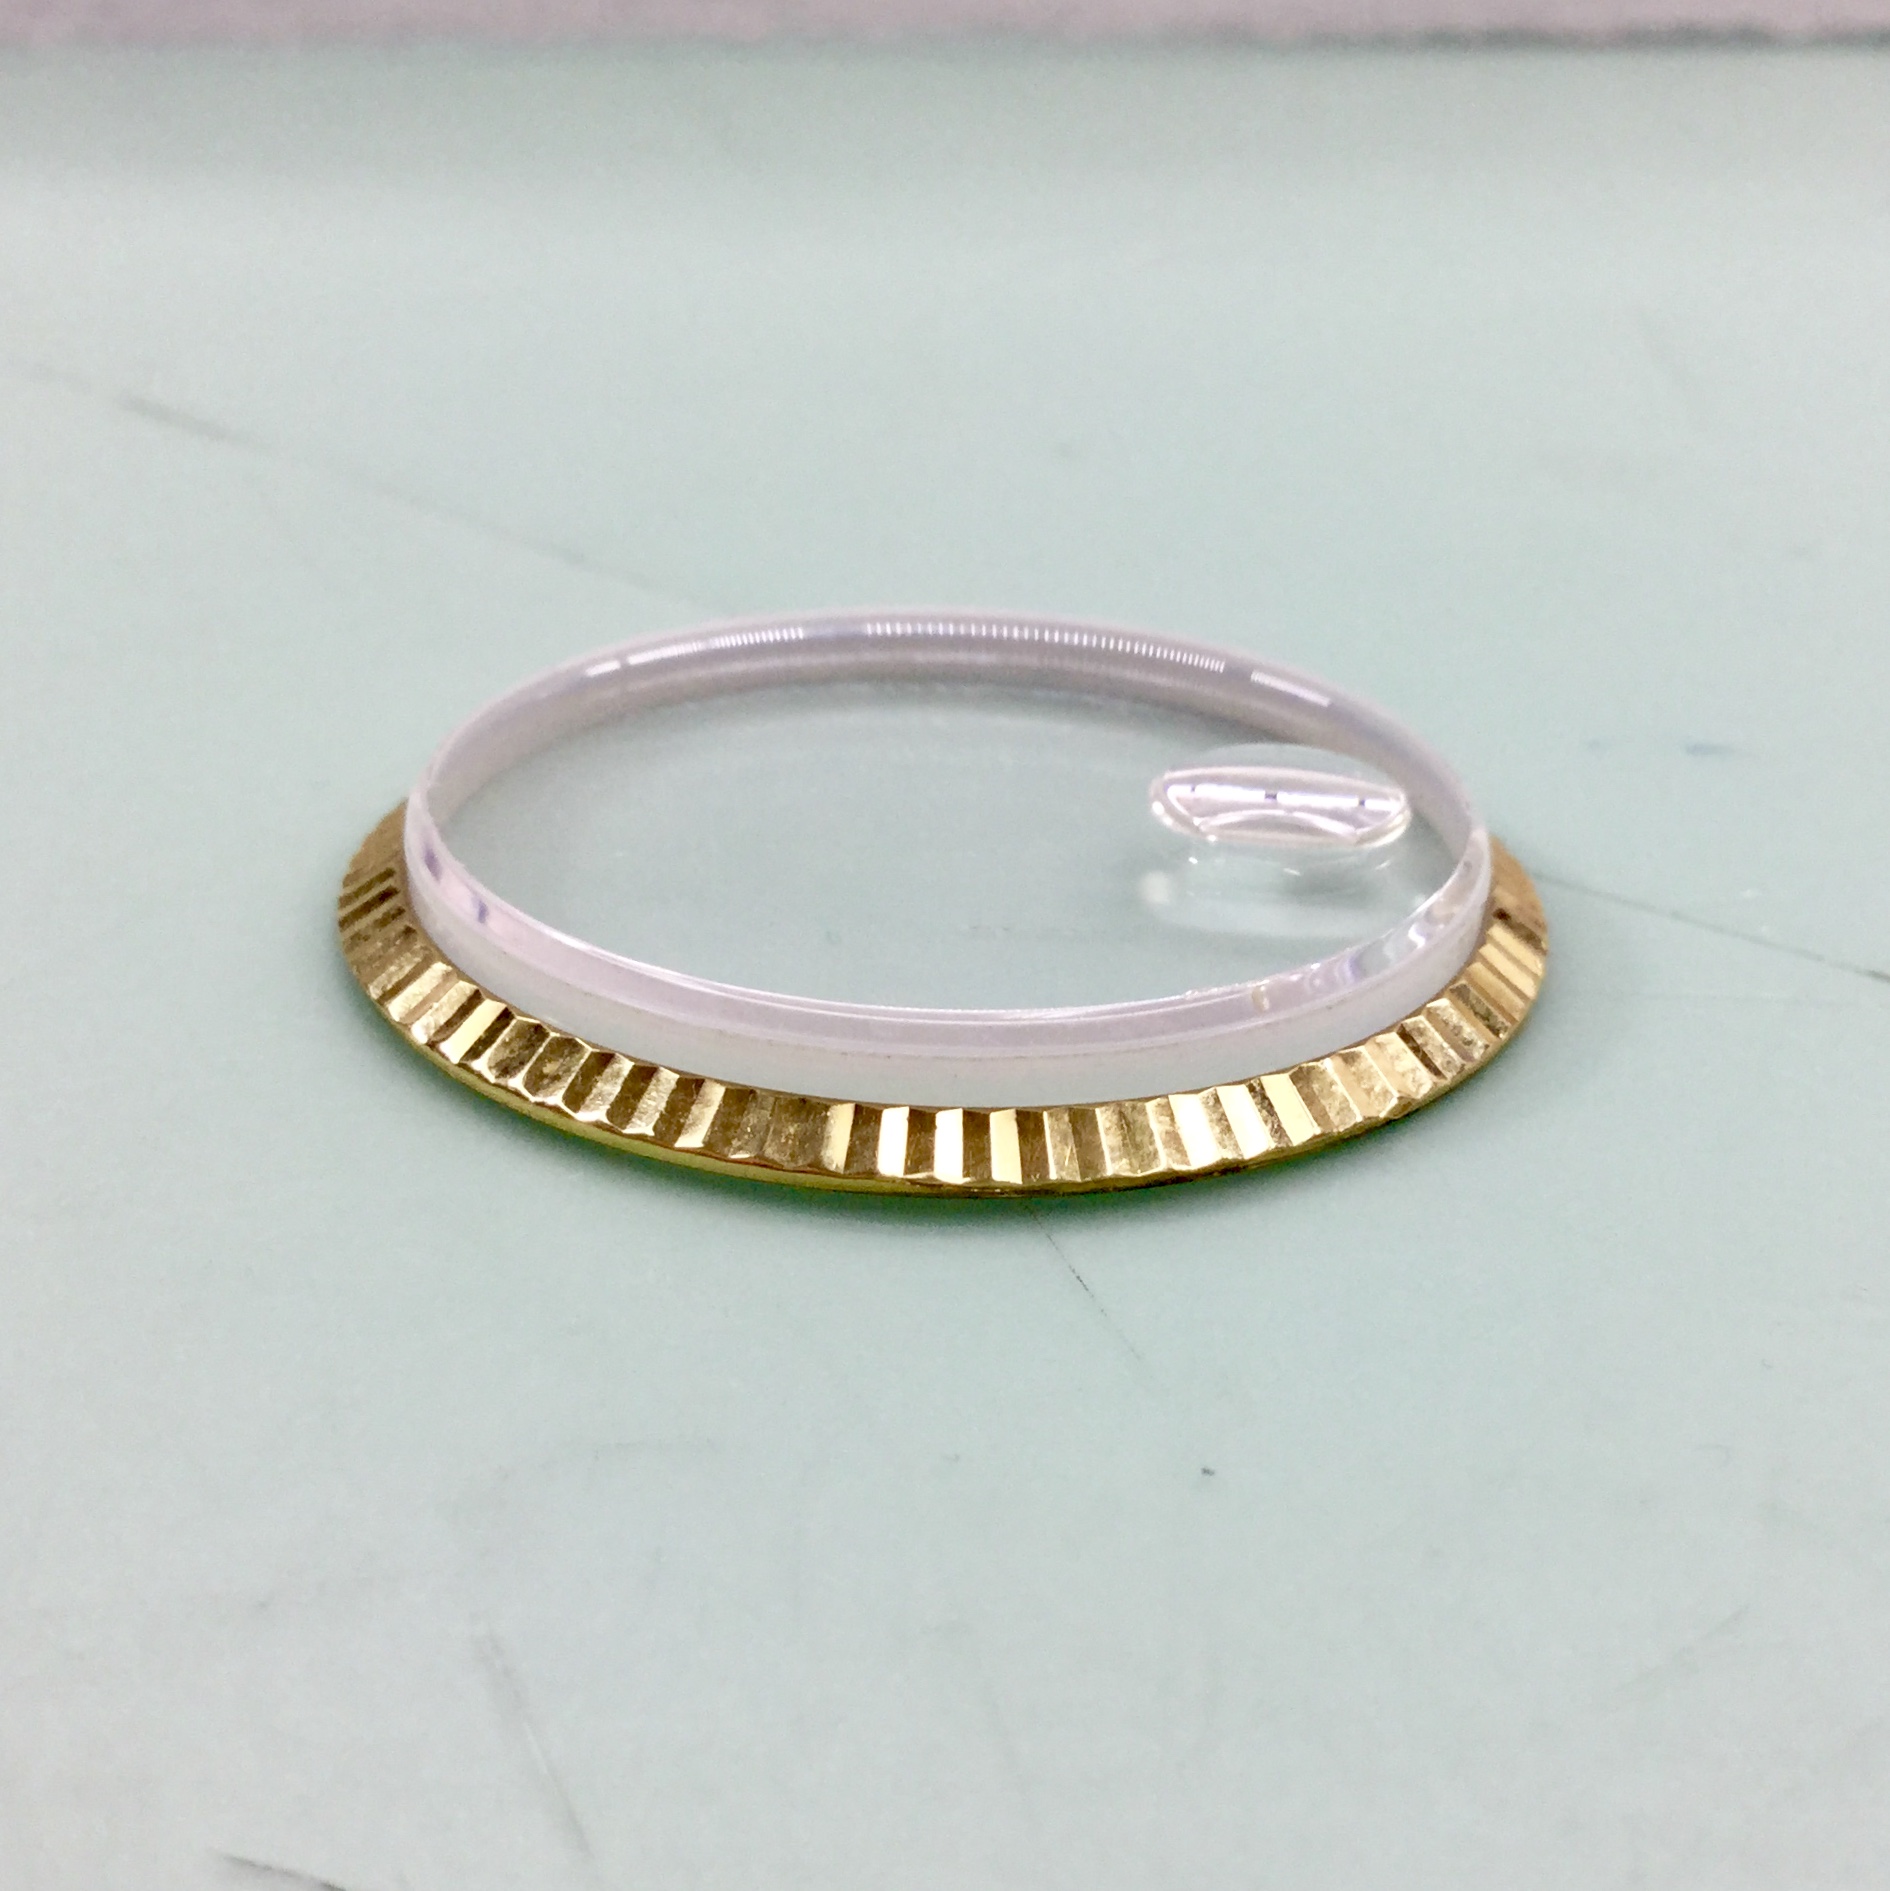 rolex watch glass replacement cost